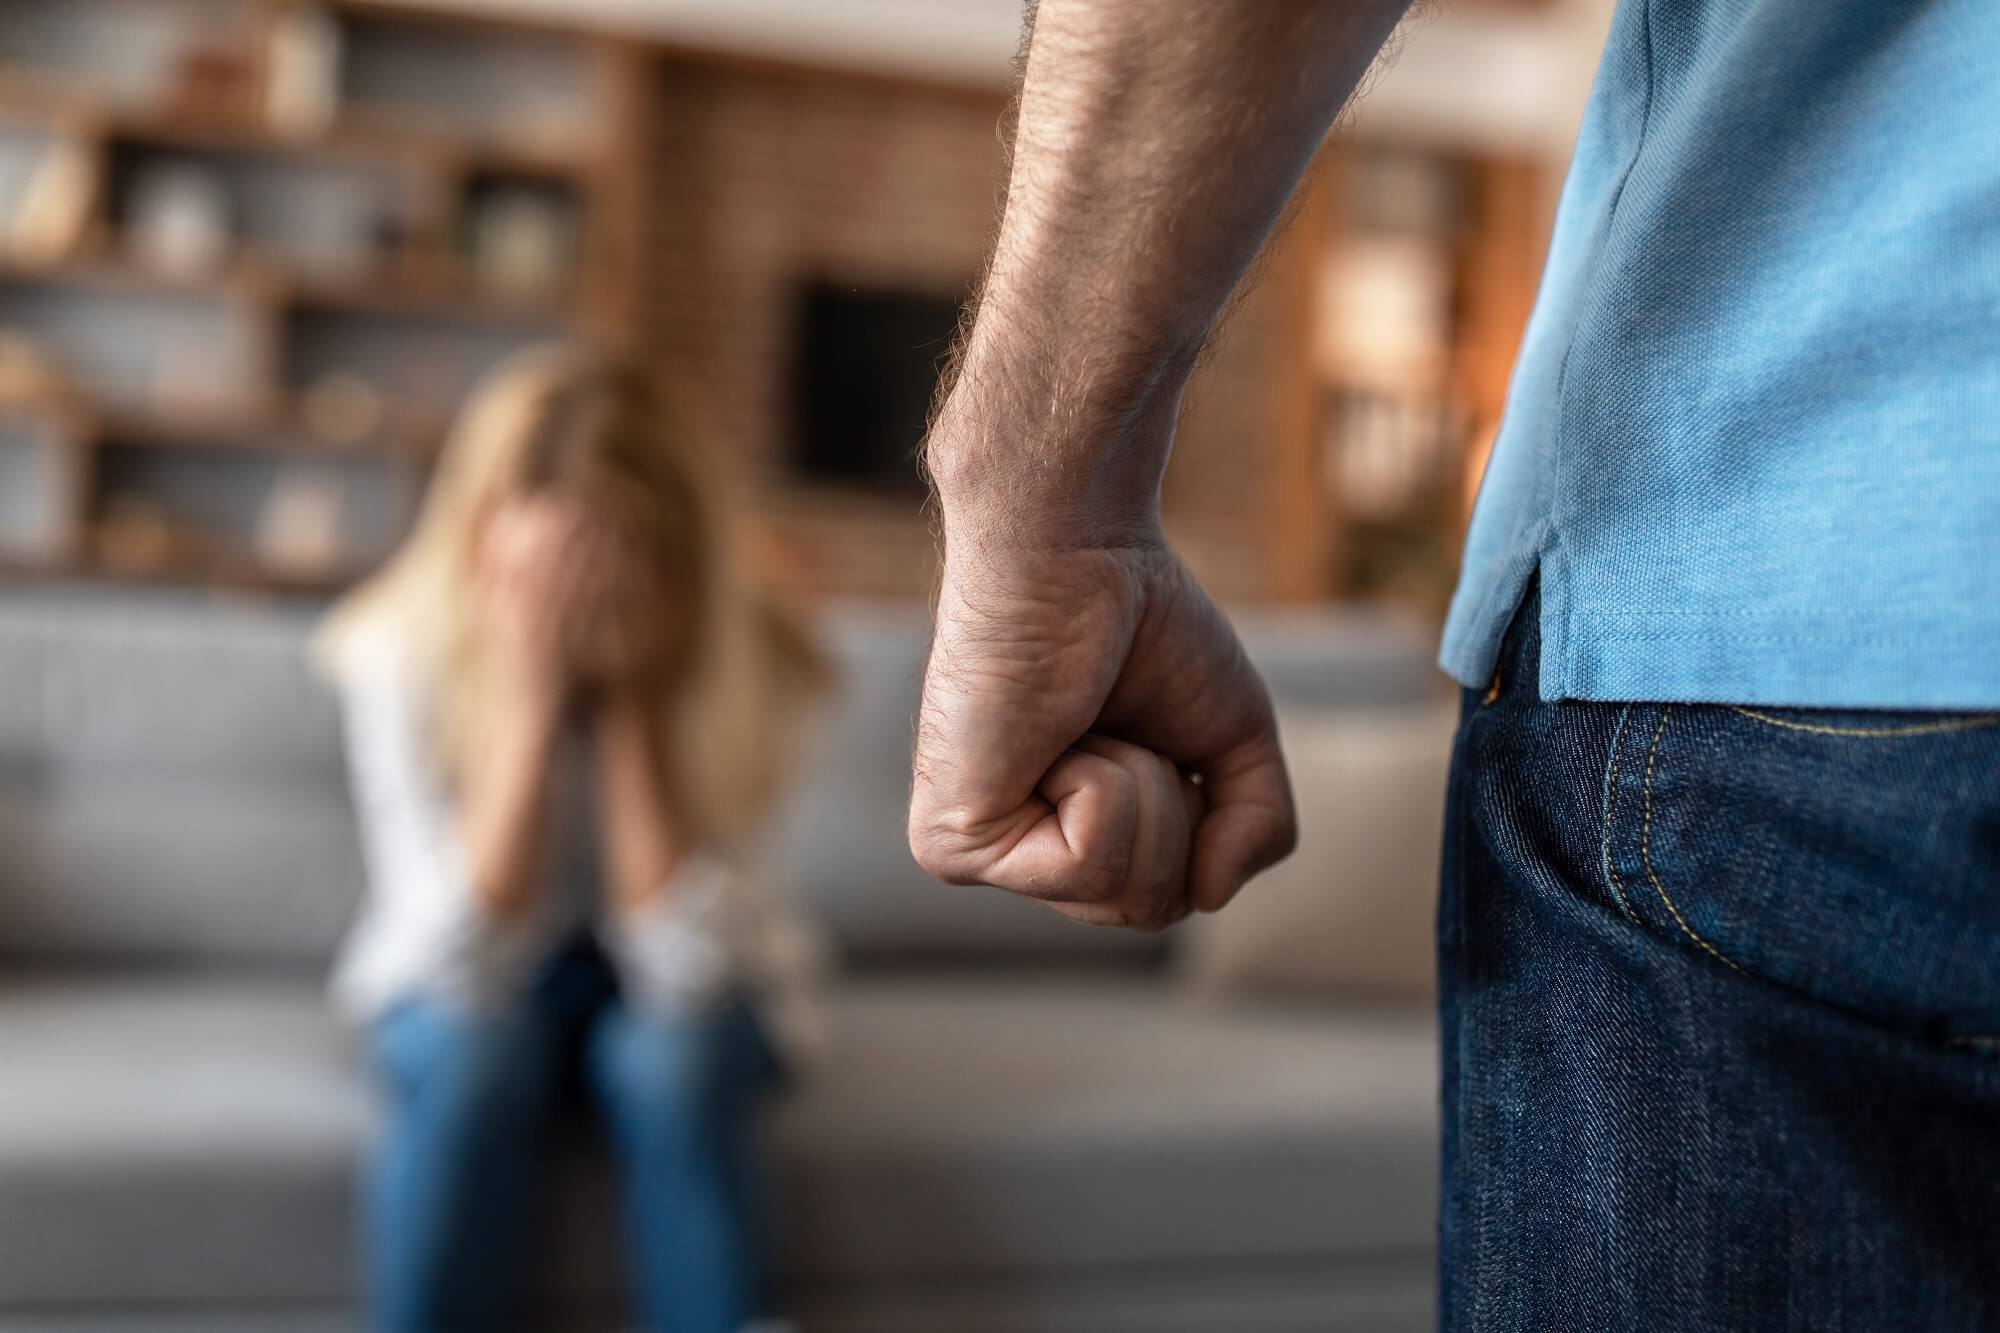 A woman suffers from abuse, which is grounds for divorce.